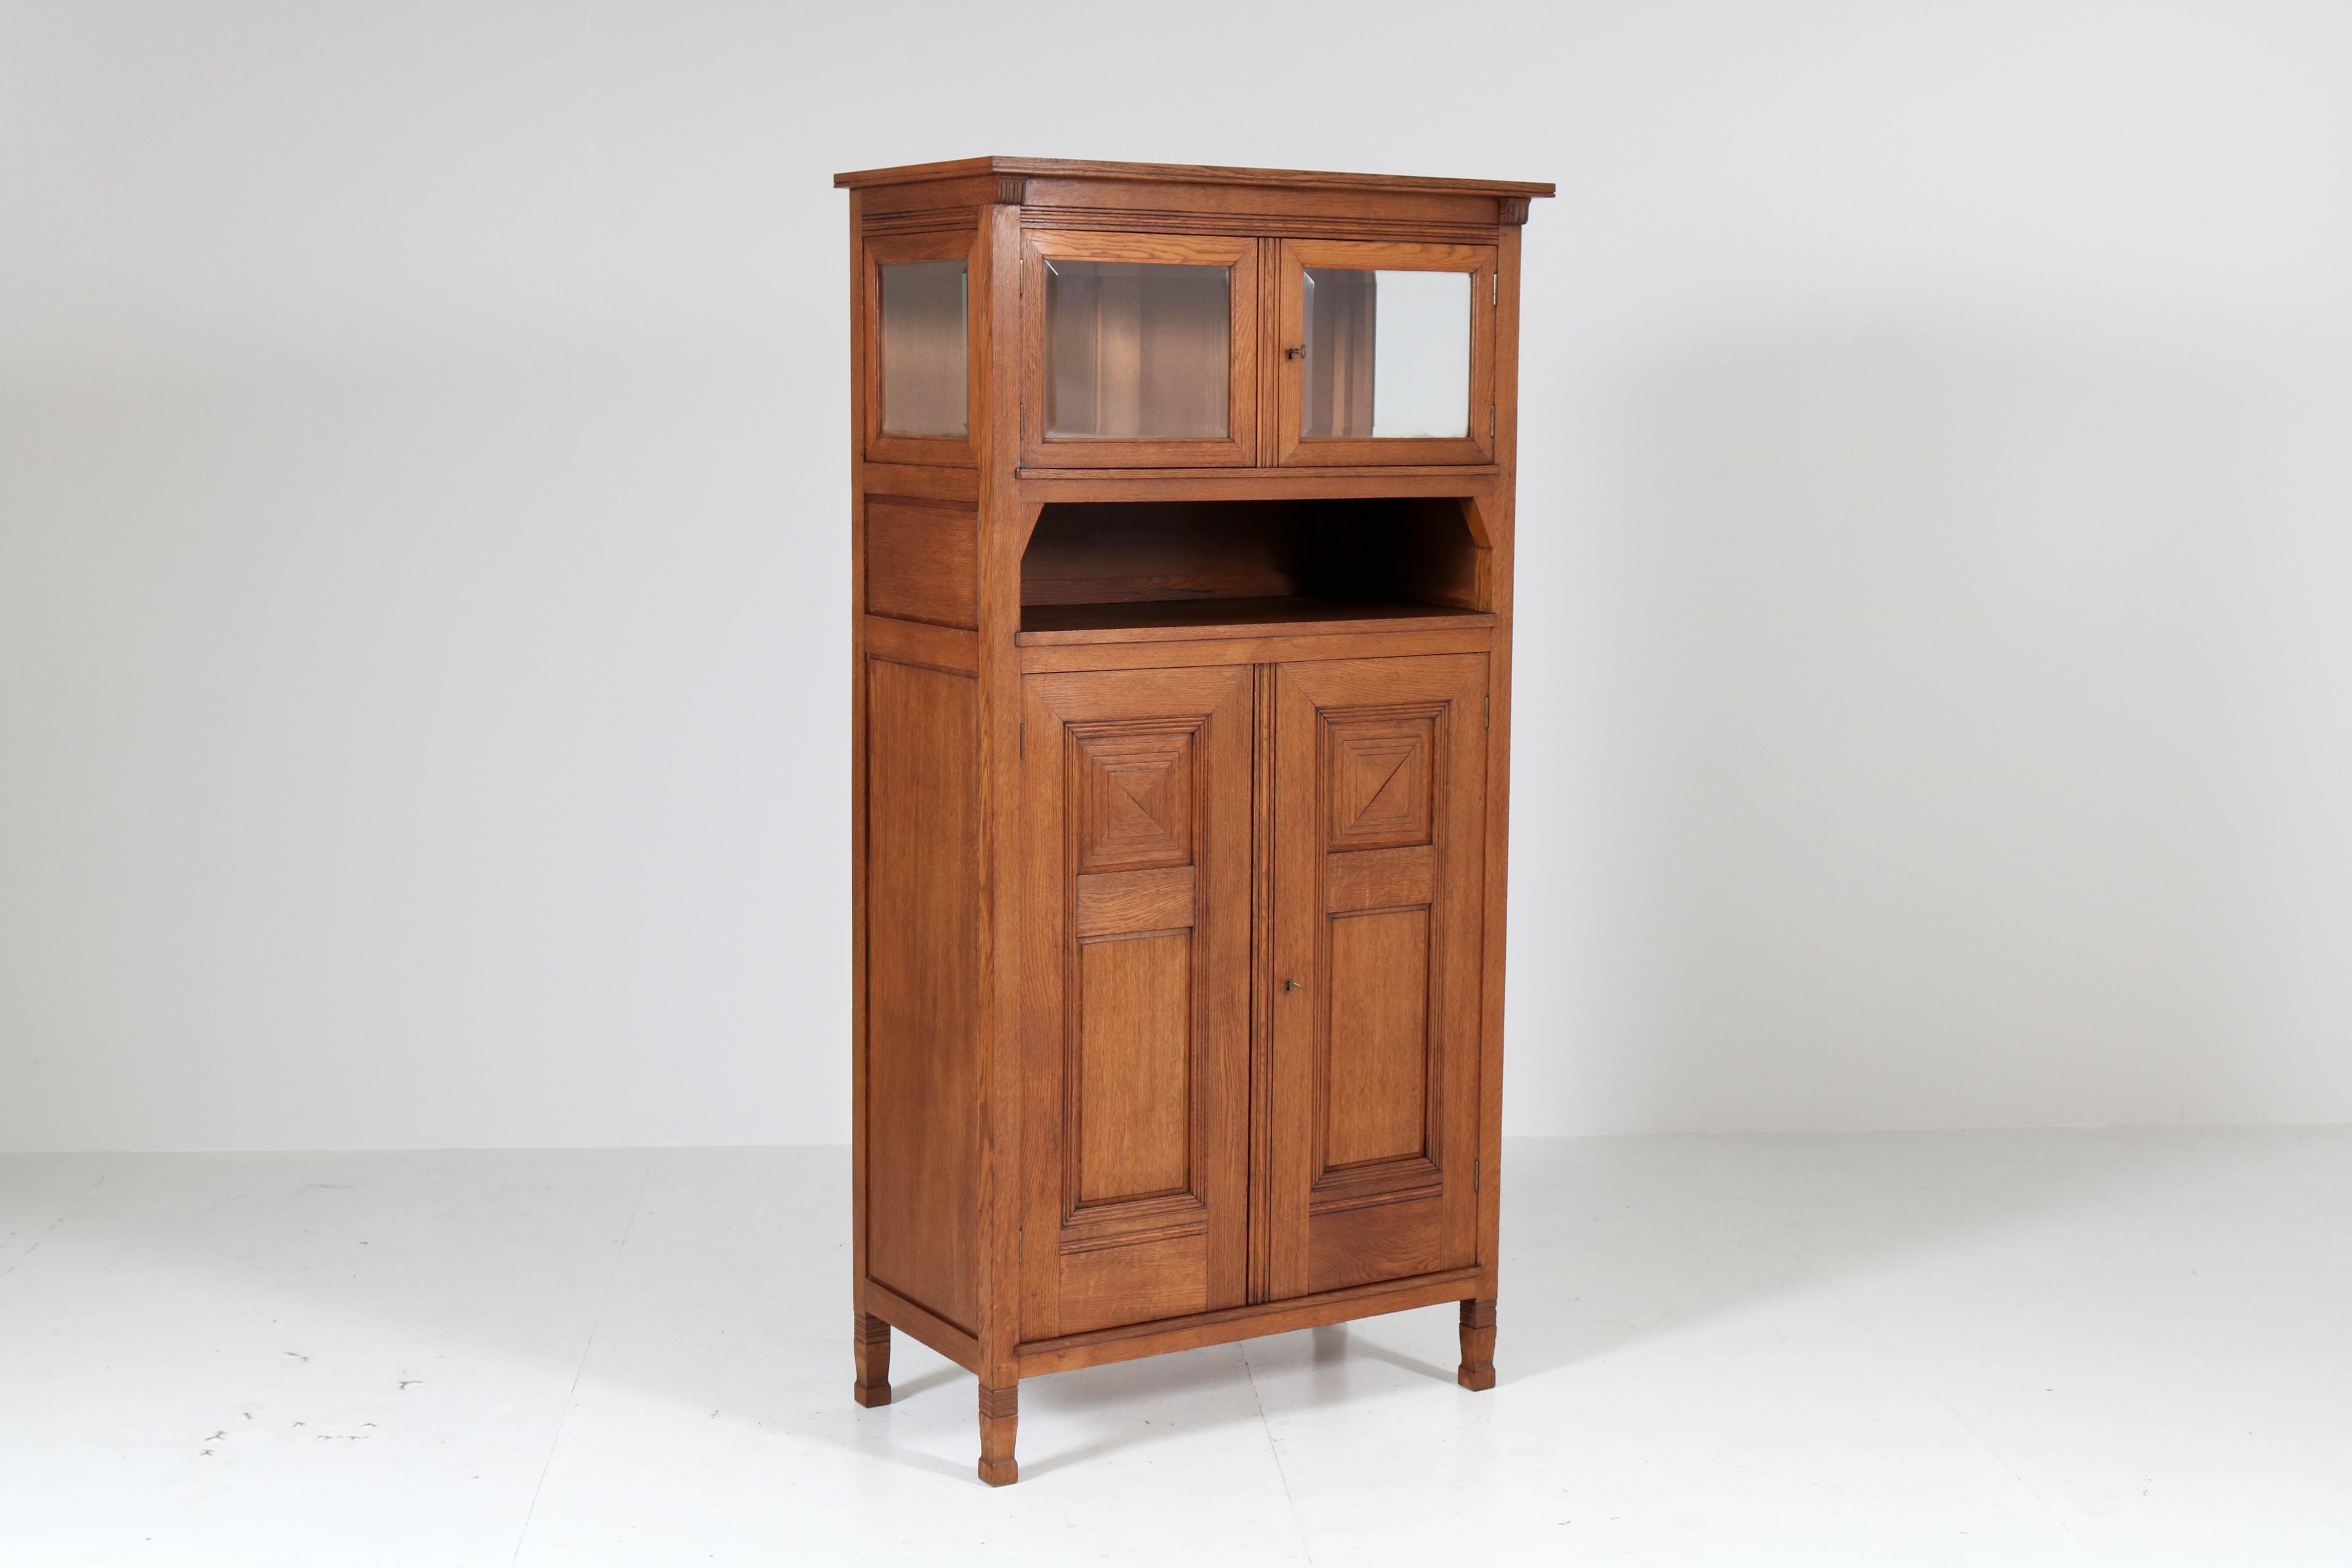 Oak Art Nouveau Arts & Crafts Bookcase by A.R. Wittop Koning for J.A. Huizinga 3